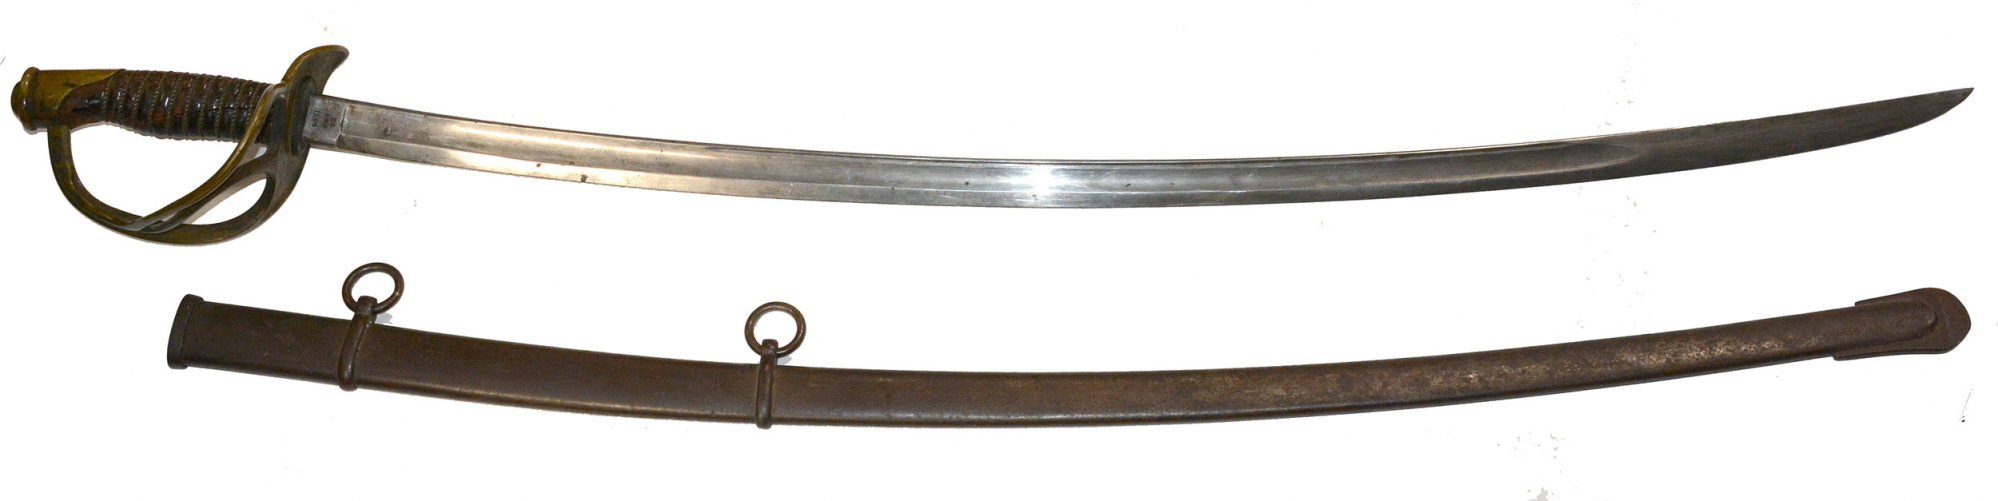 AMES MODEL 1860 LIGHT CAVALRY SABER DATED 1864